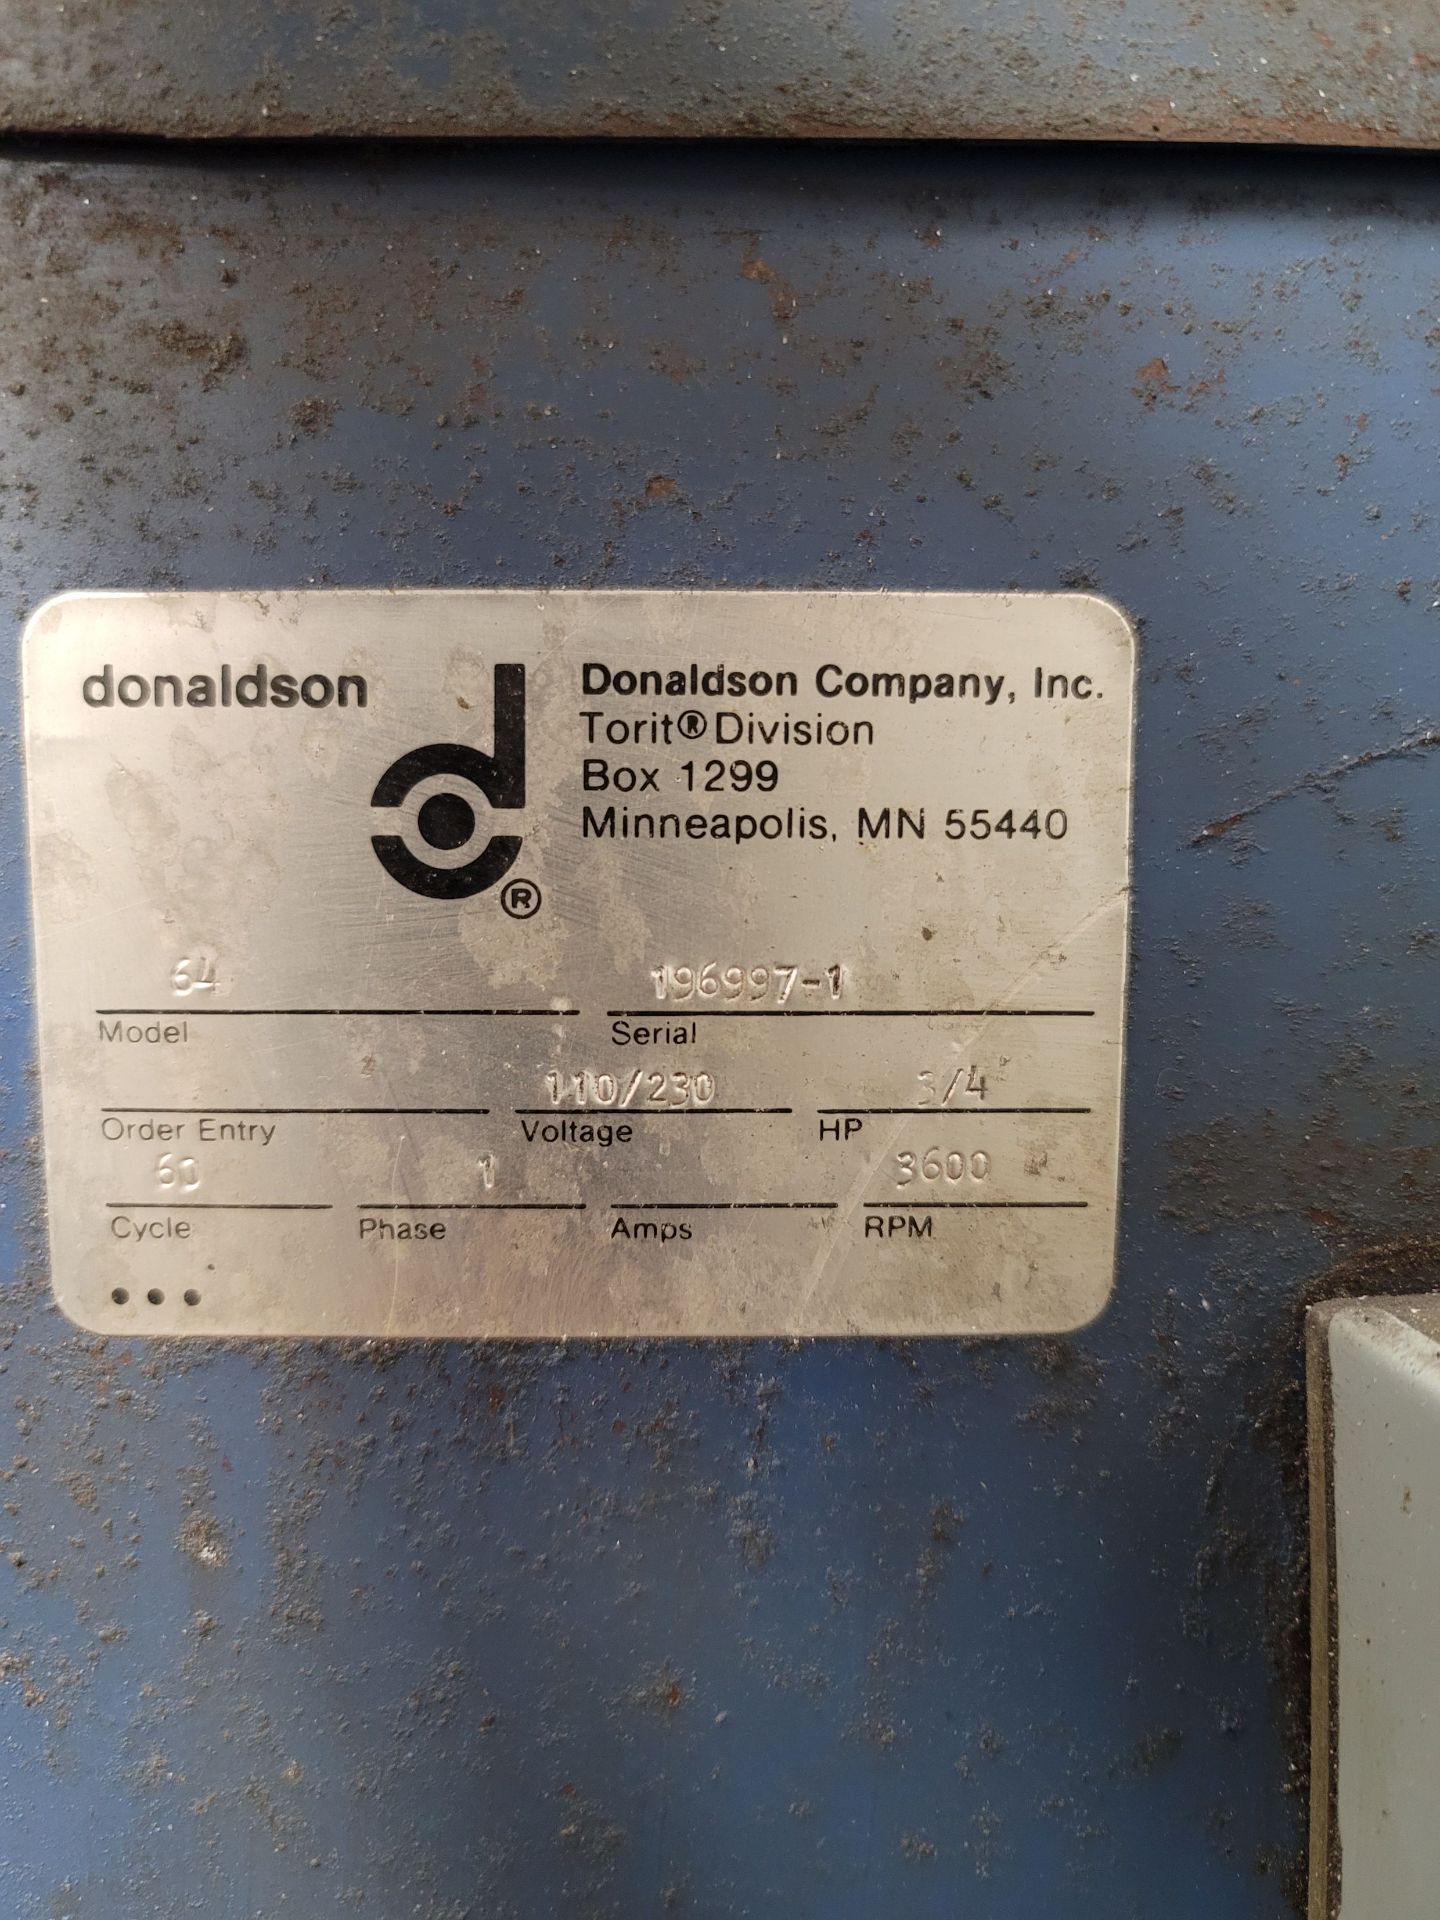 DONALDSON TORIT DUST COLLECTOR, MODEL 64, S/N 196997-1 - Image 3 of 3